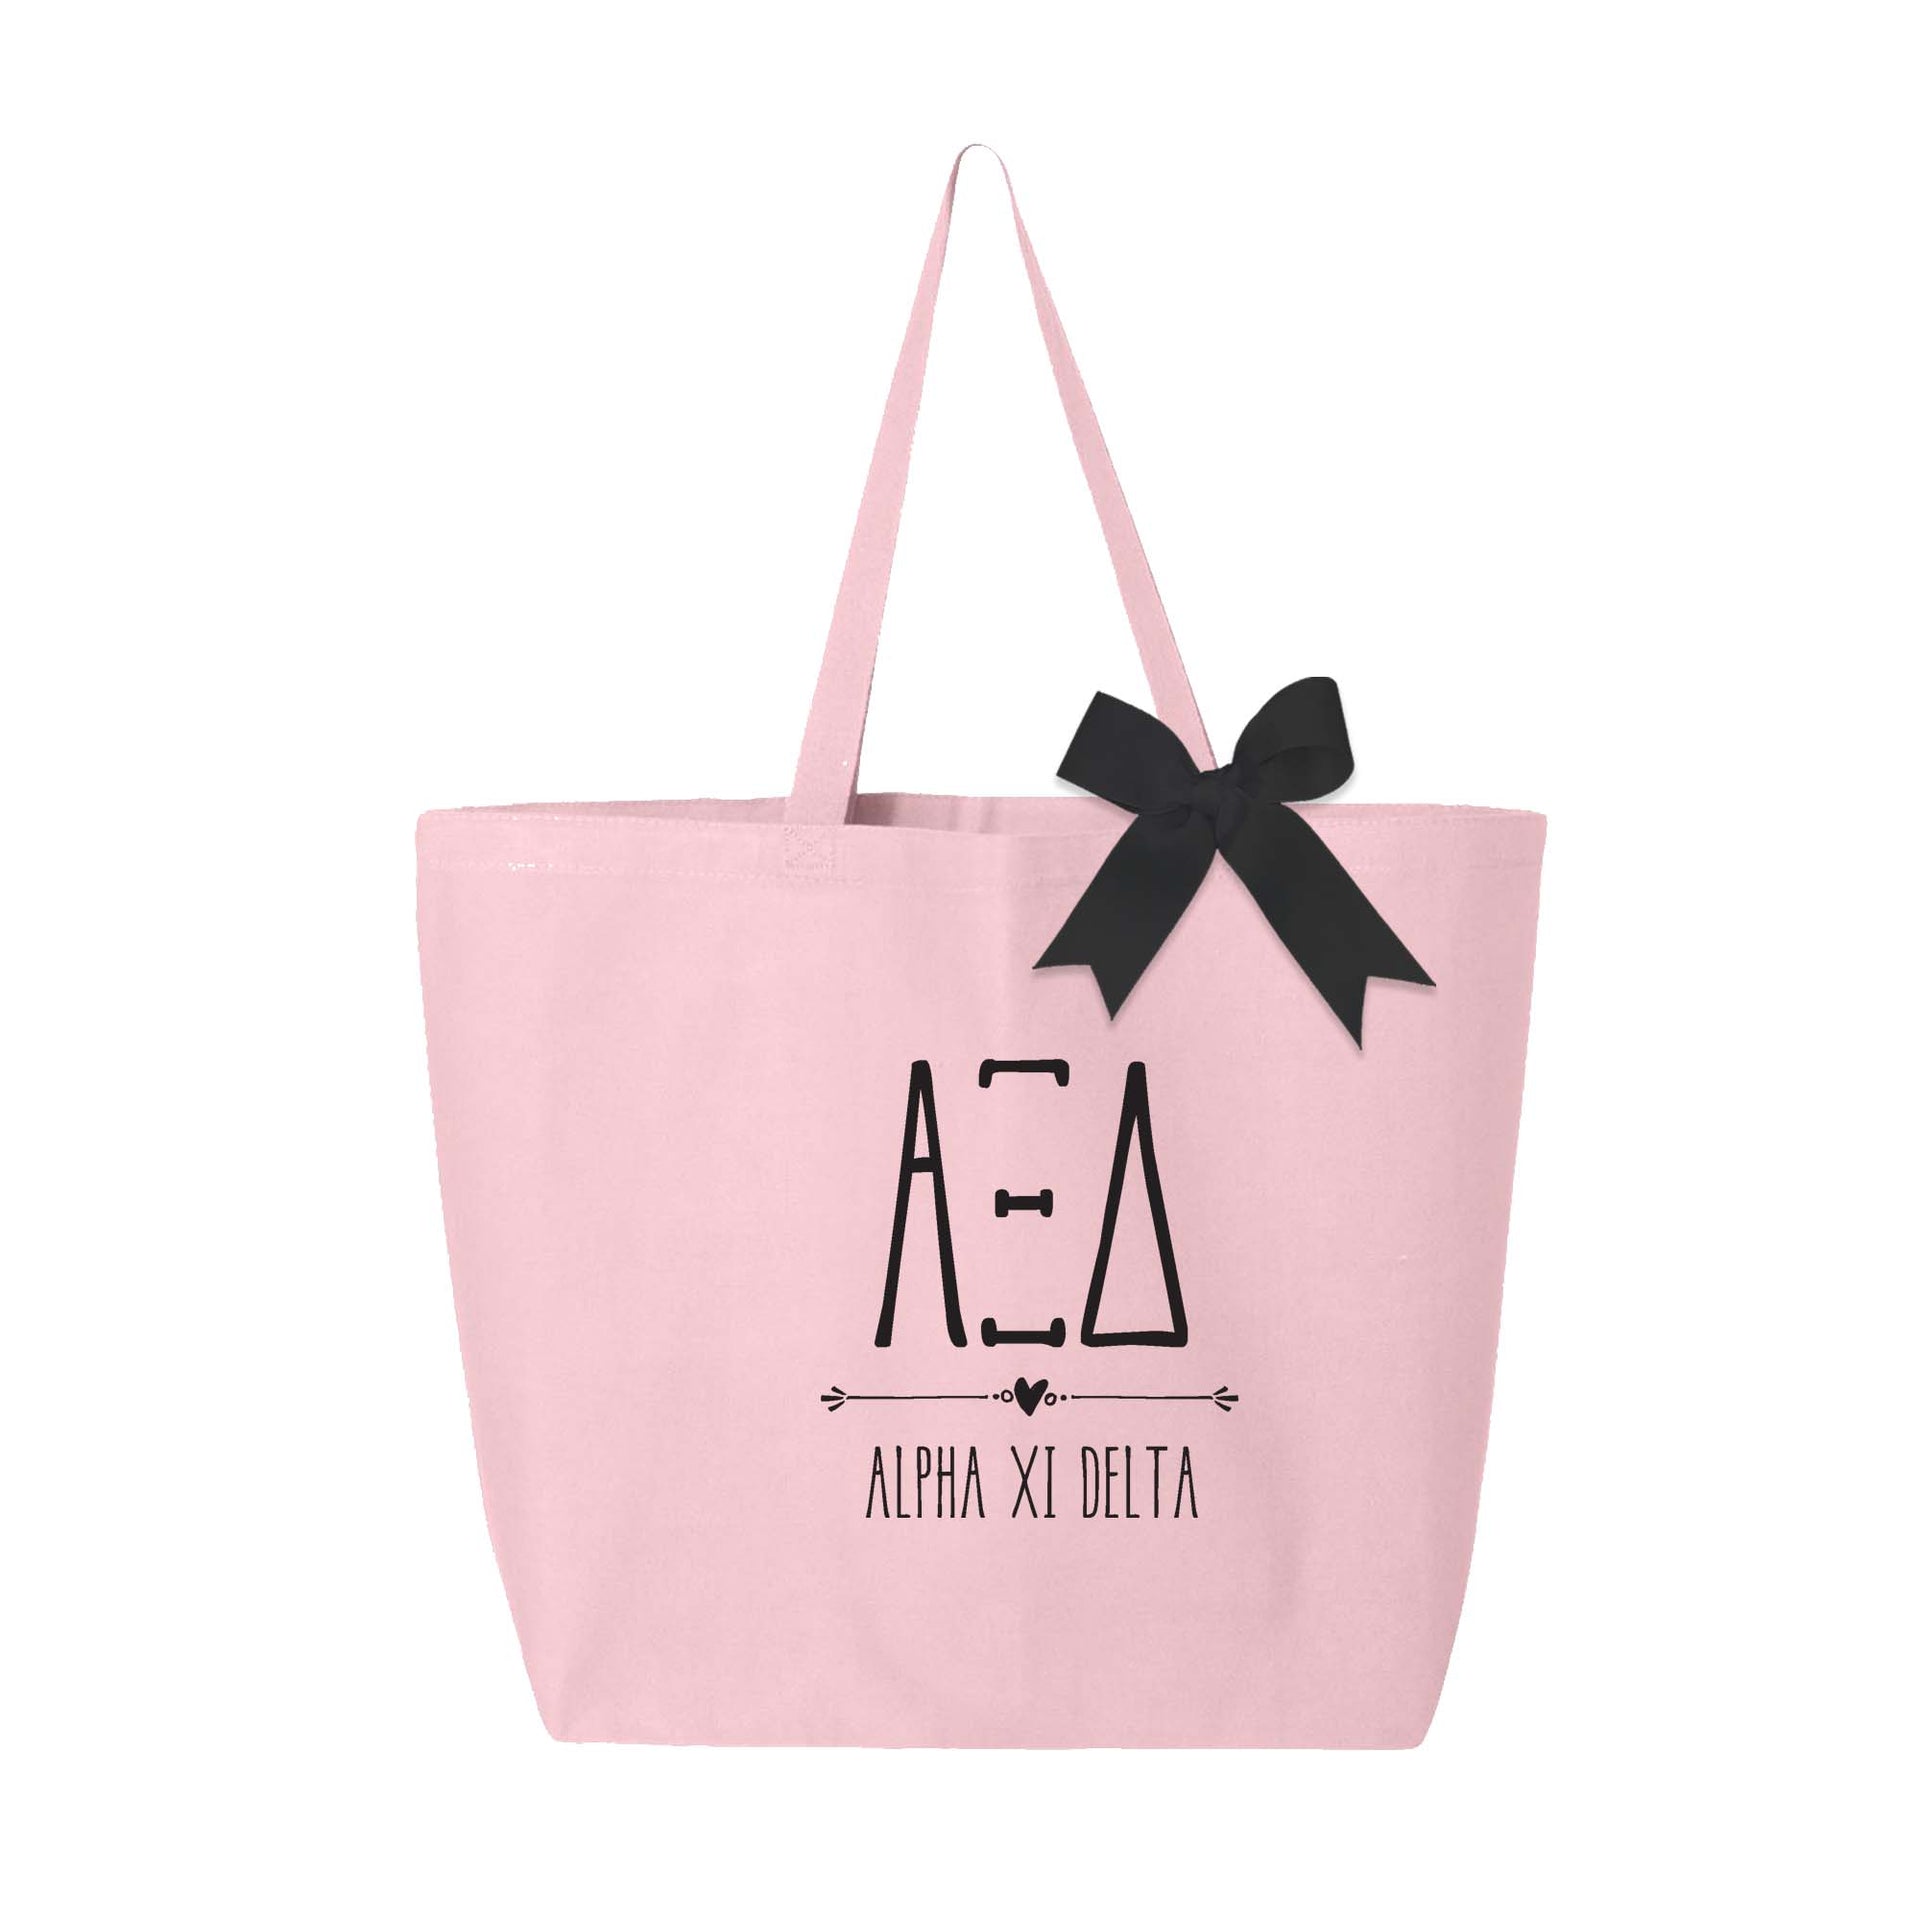 Alpha Xi Delta sorority name and letters custom printed on pink canvas tote bag with black bow